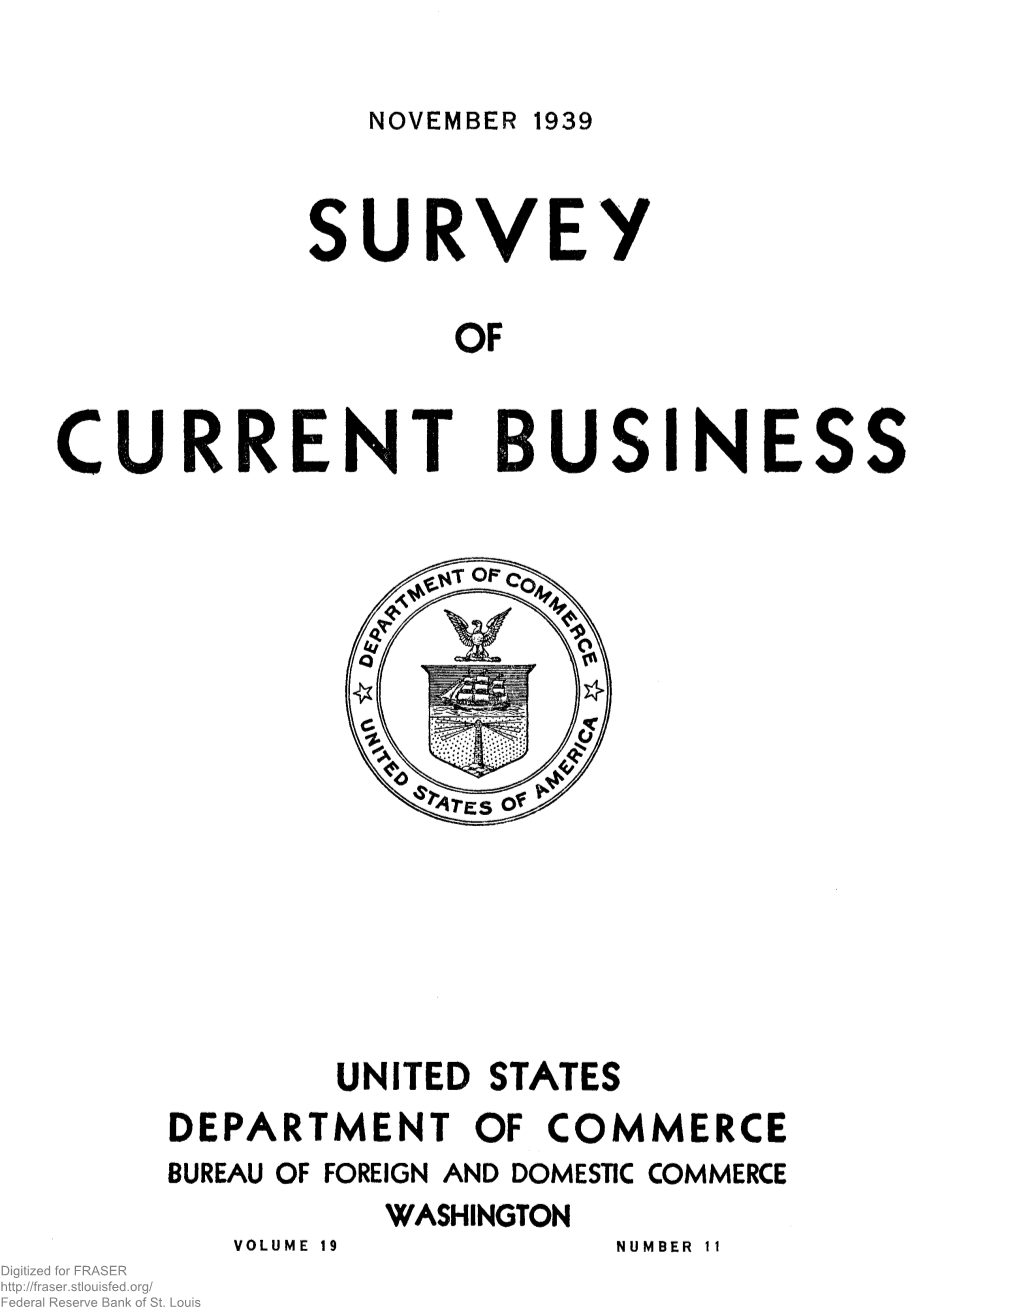 SURVEY of CURRENT BUSINESS November 1939 Monthly Business Indicators, 1929-39